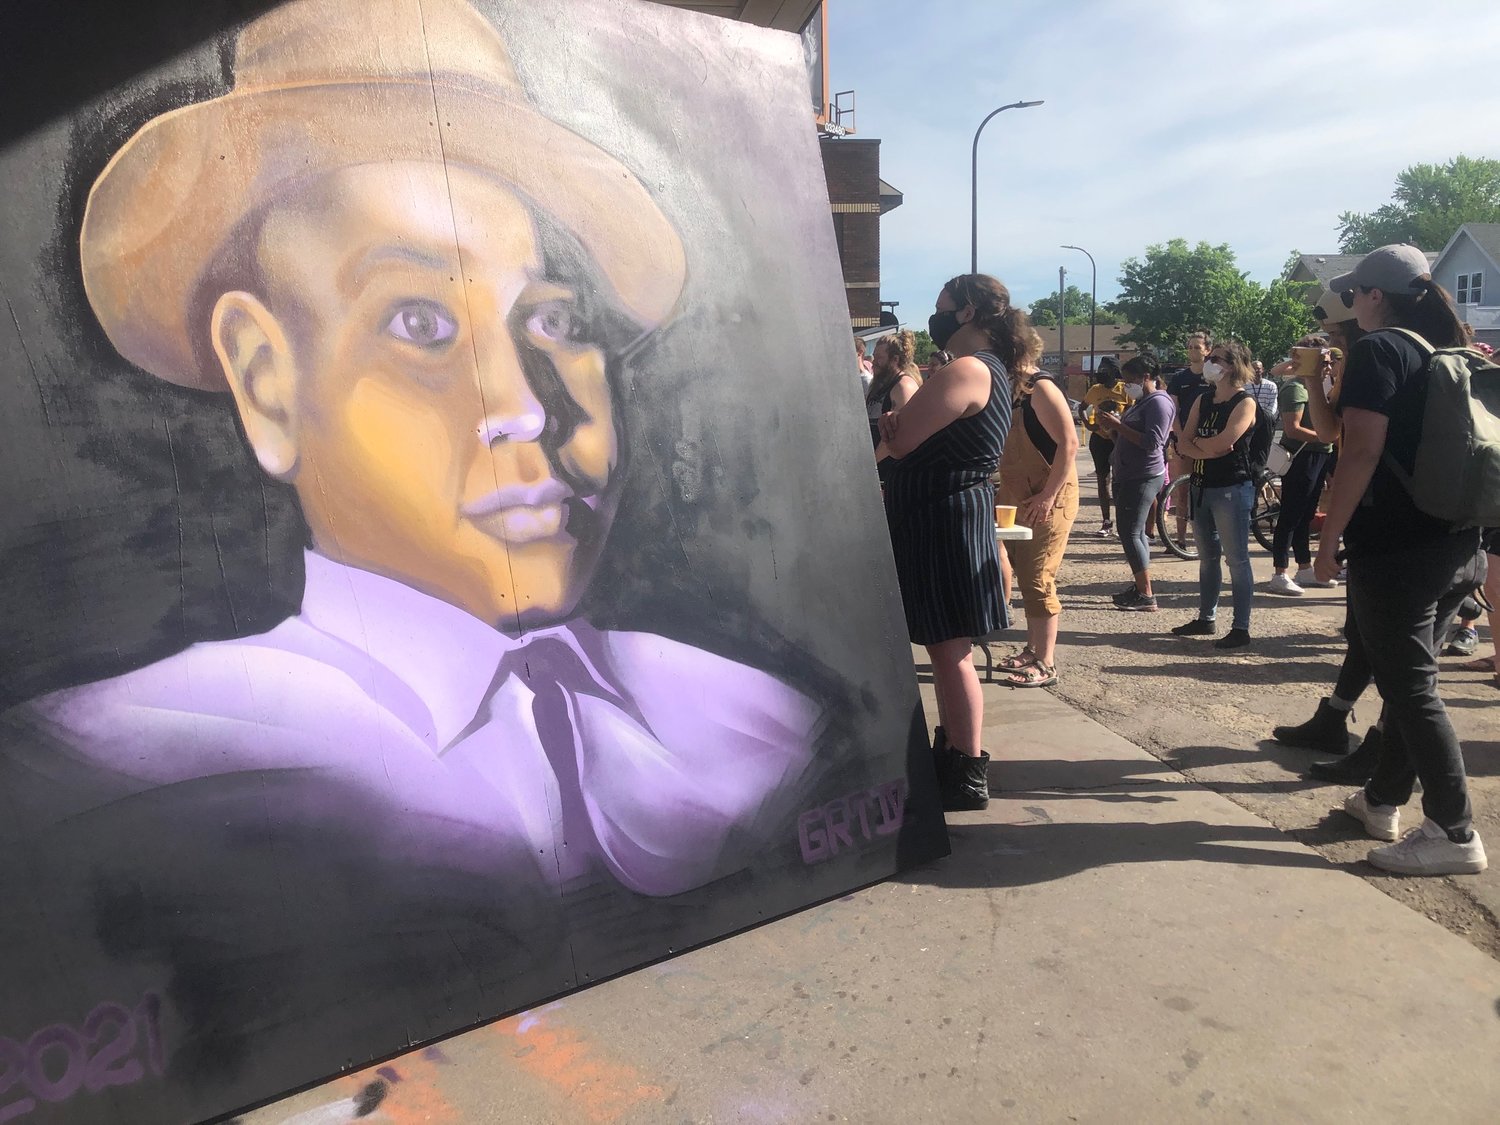 A new portrait of Emmett Till was installed at the Square.